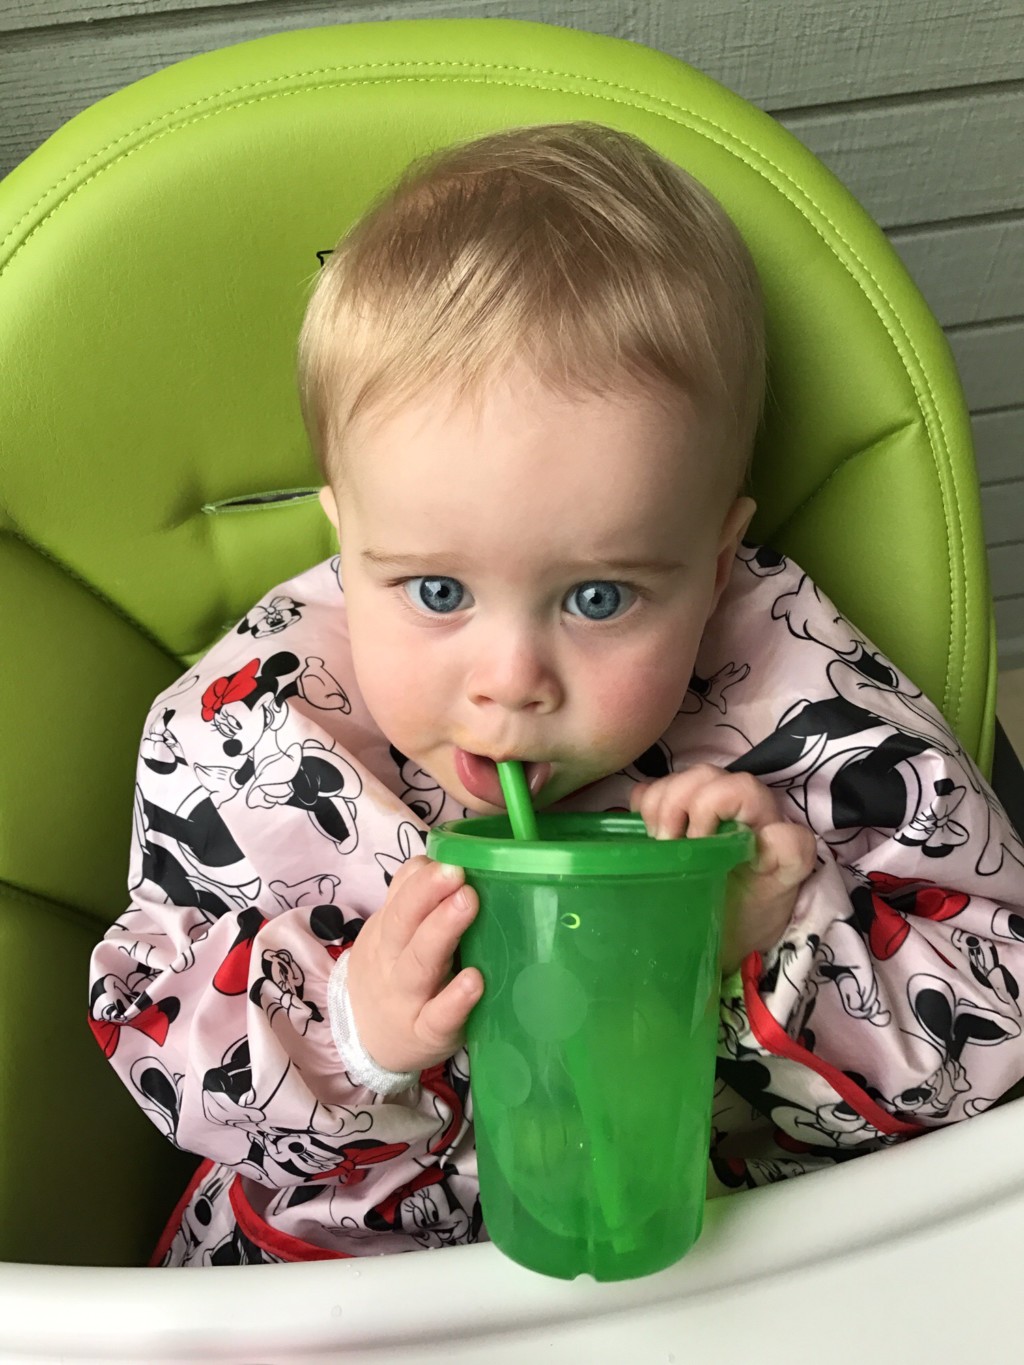 The Great Toddler Transition: From Bottles to Sippy Cups